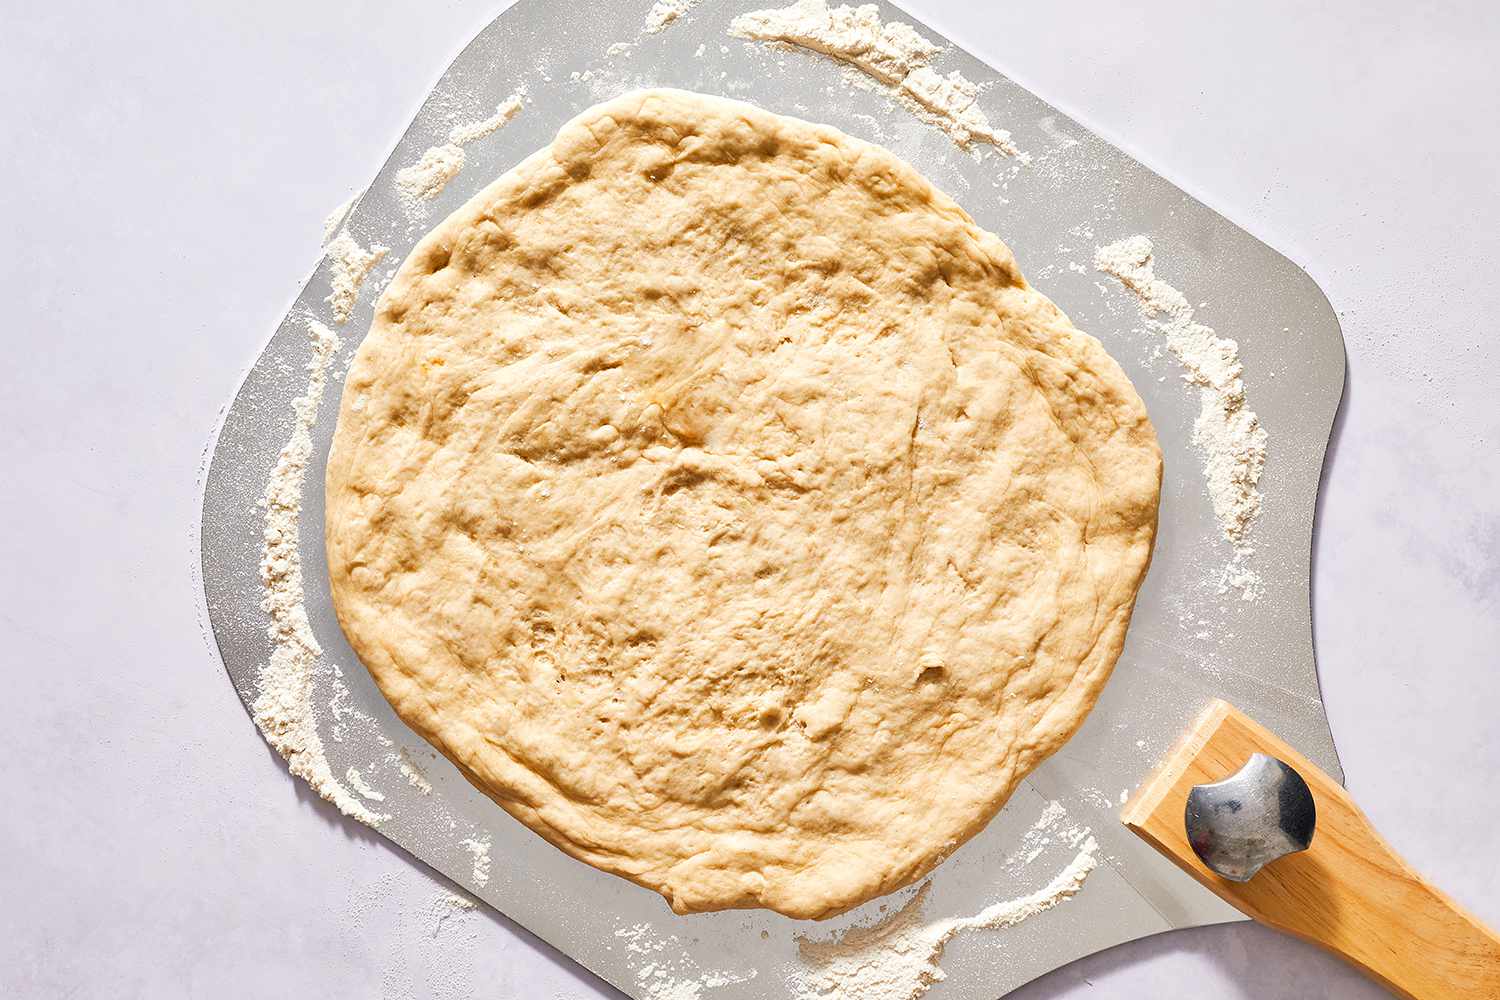 Pizza dough stretched out on a pizza peel